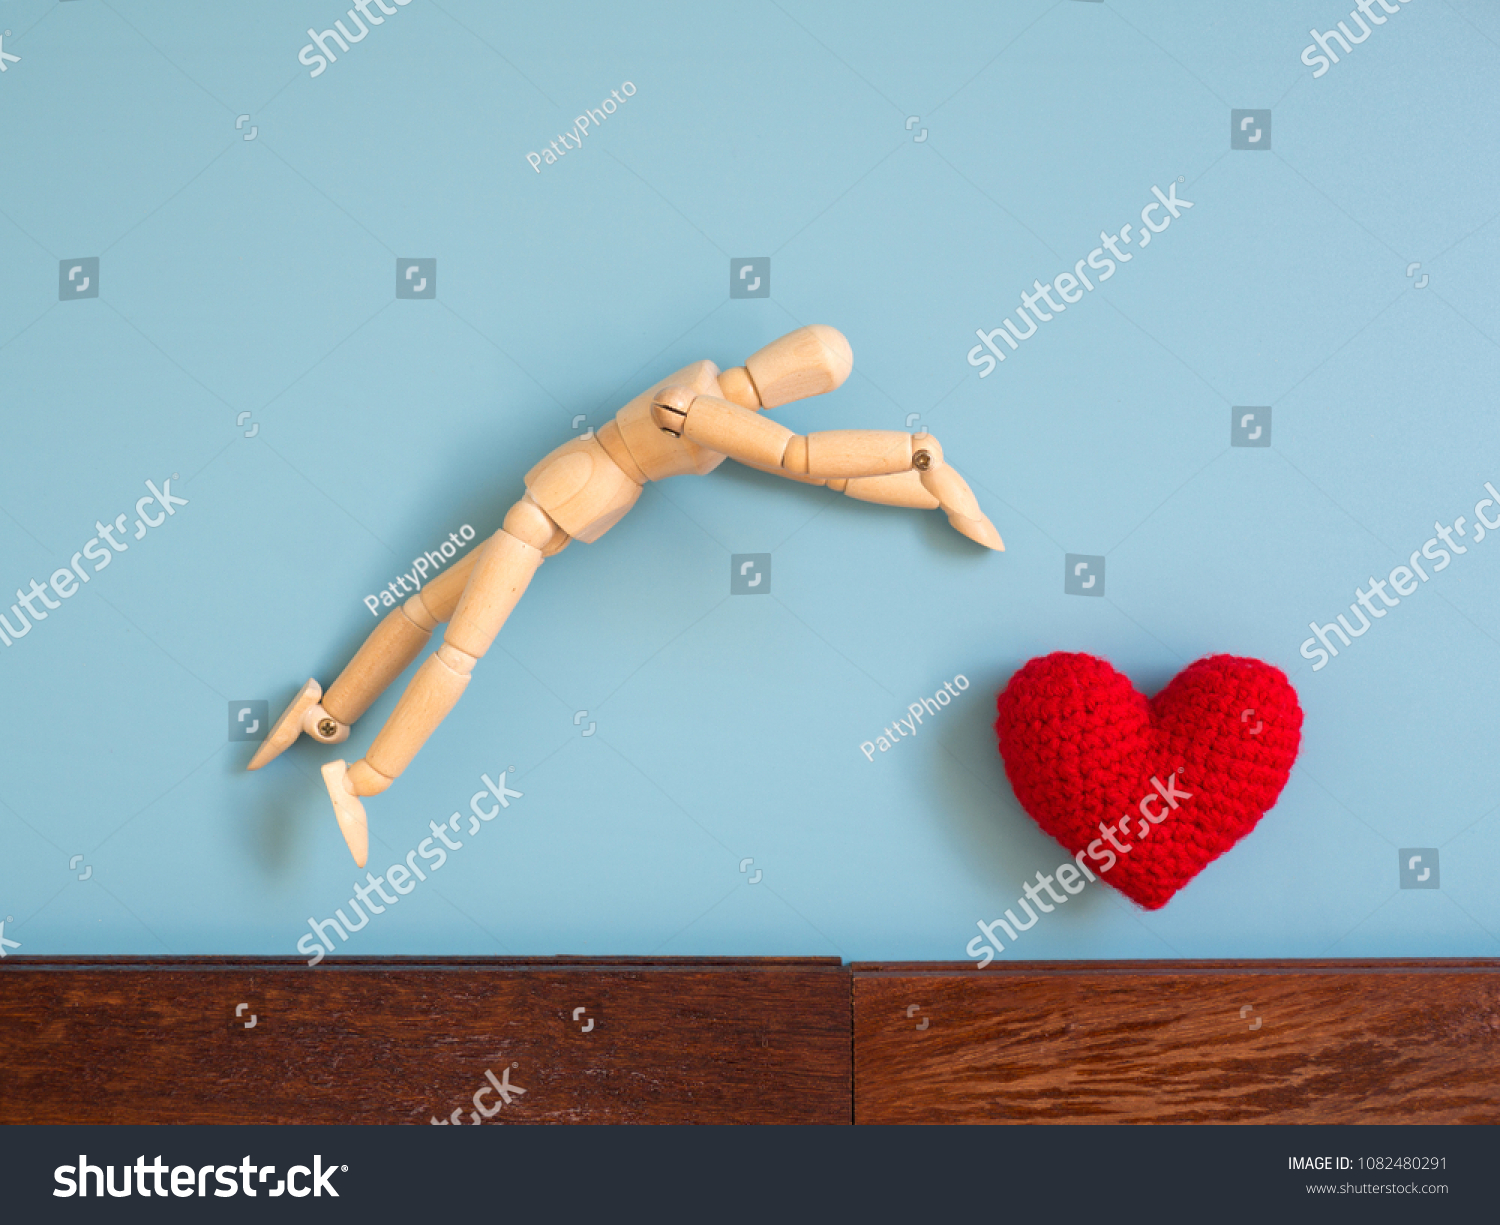 Wooden puppet jumping from the wooden floor in the air to catch the red heart floating in the sky. Wooden puppet try to jump to catch love. Concept of effort and love #1082480291